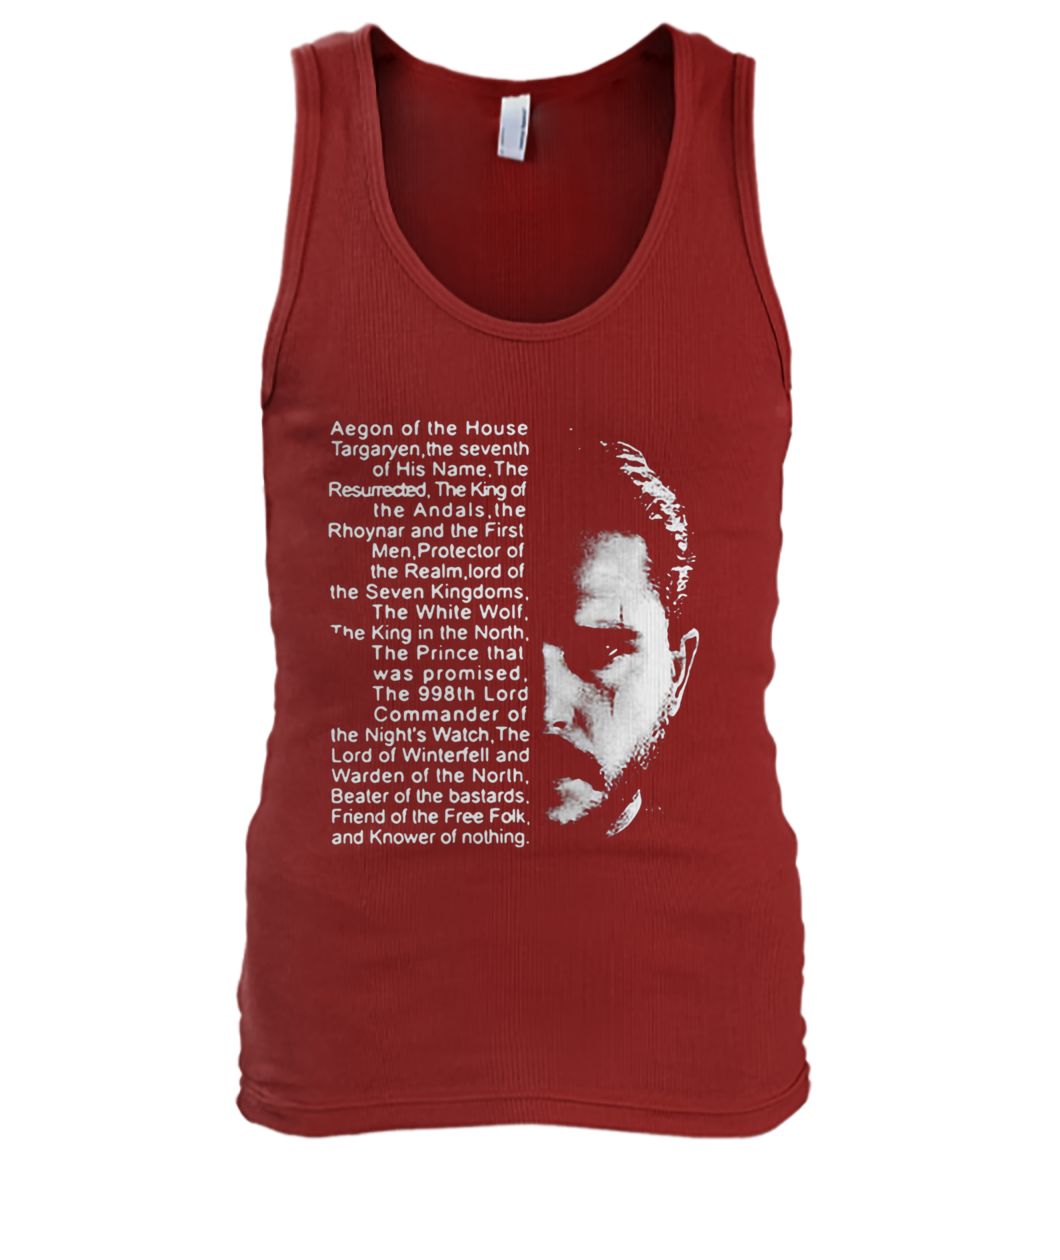 Post malone and game of thrones aegon of the house men's tank top